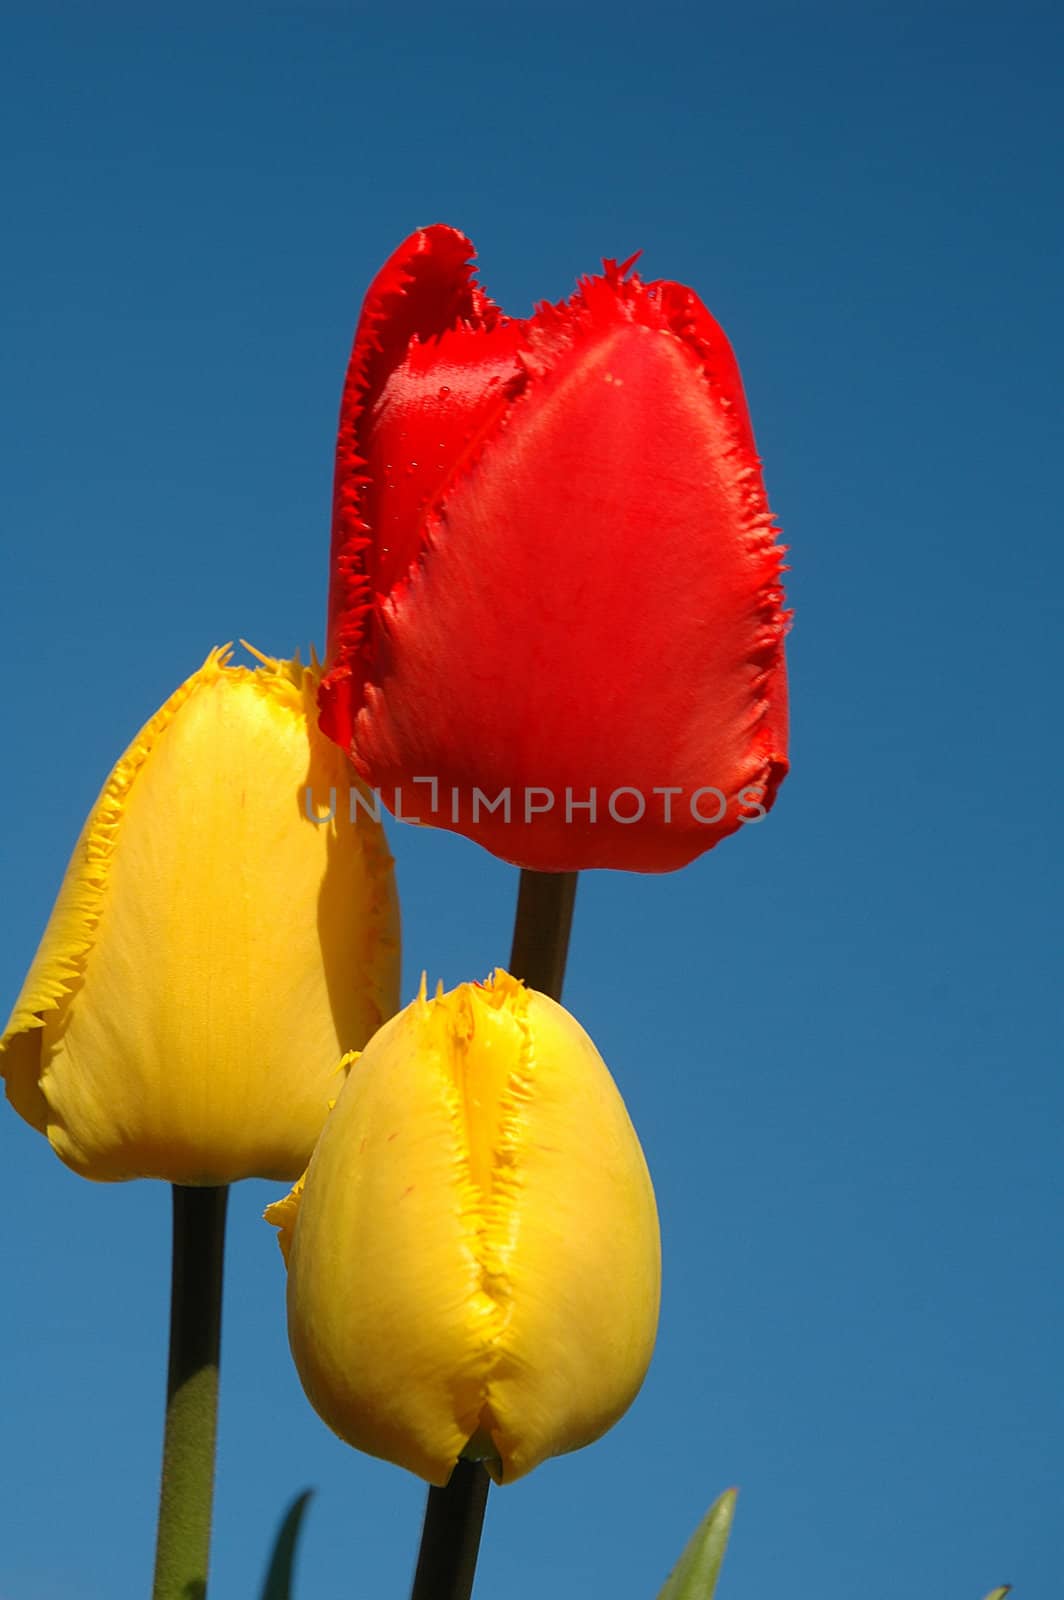 The red and yellow tulips against background of blue sky.